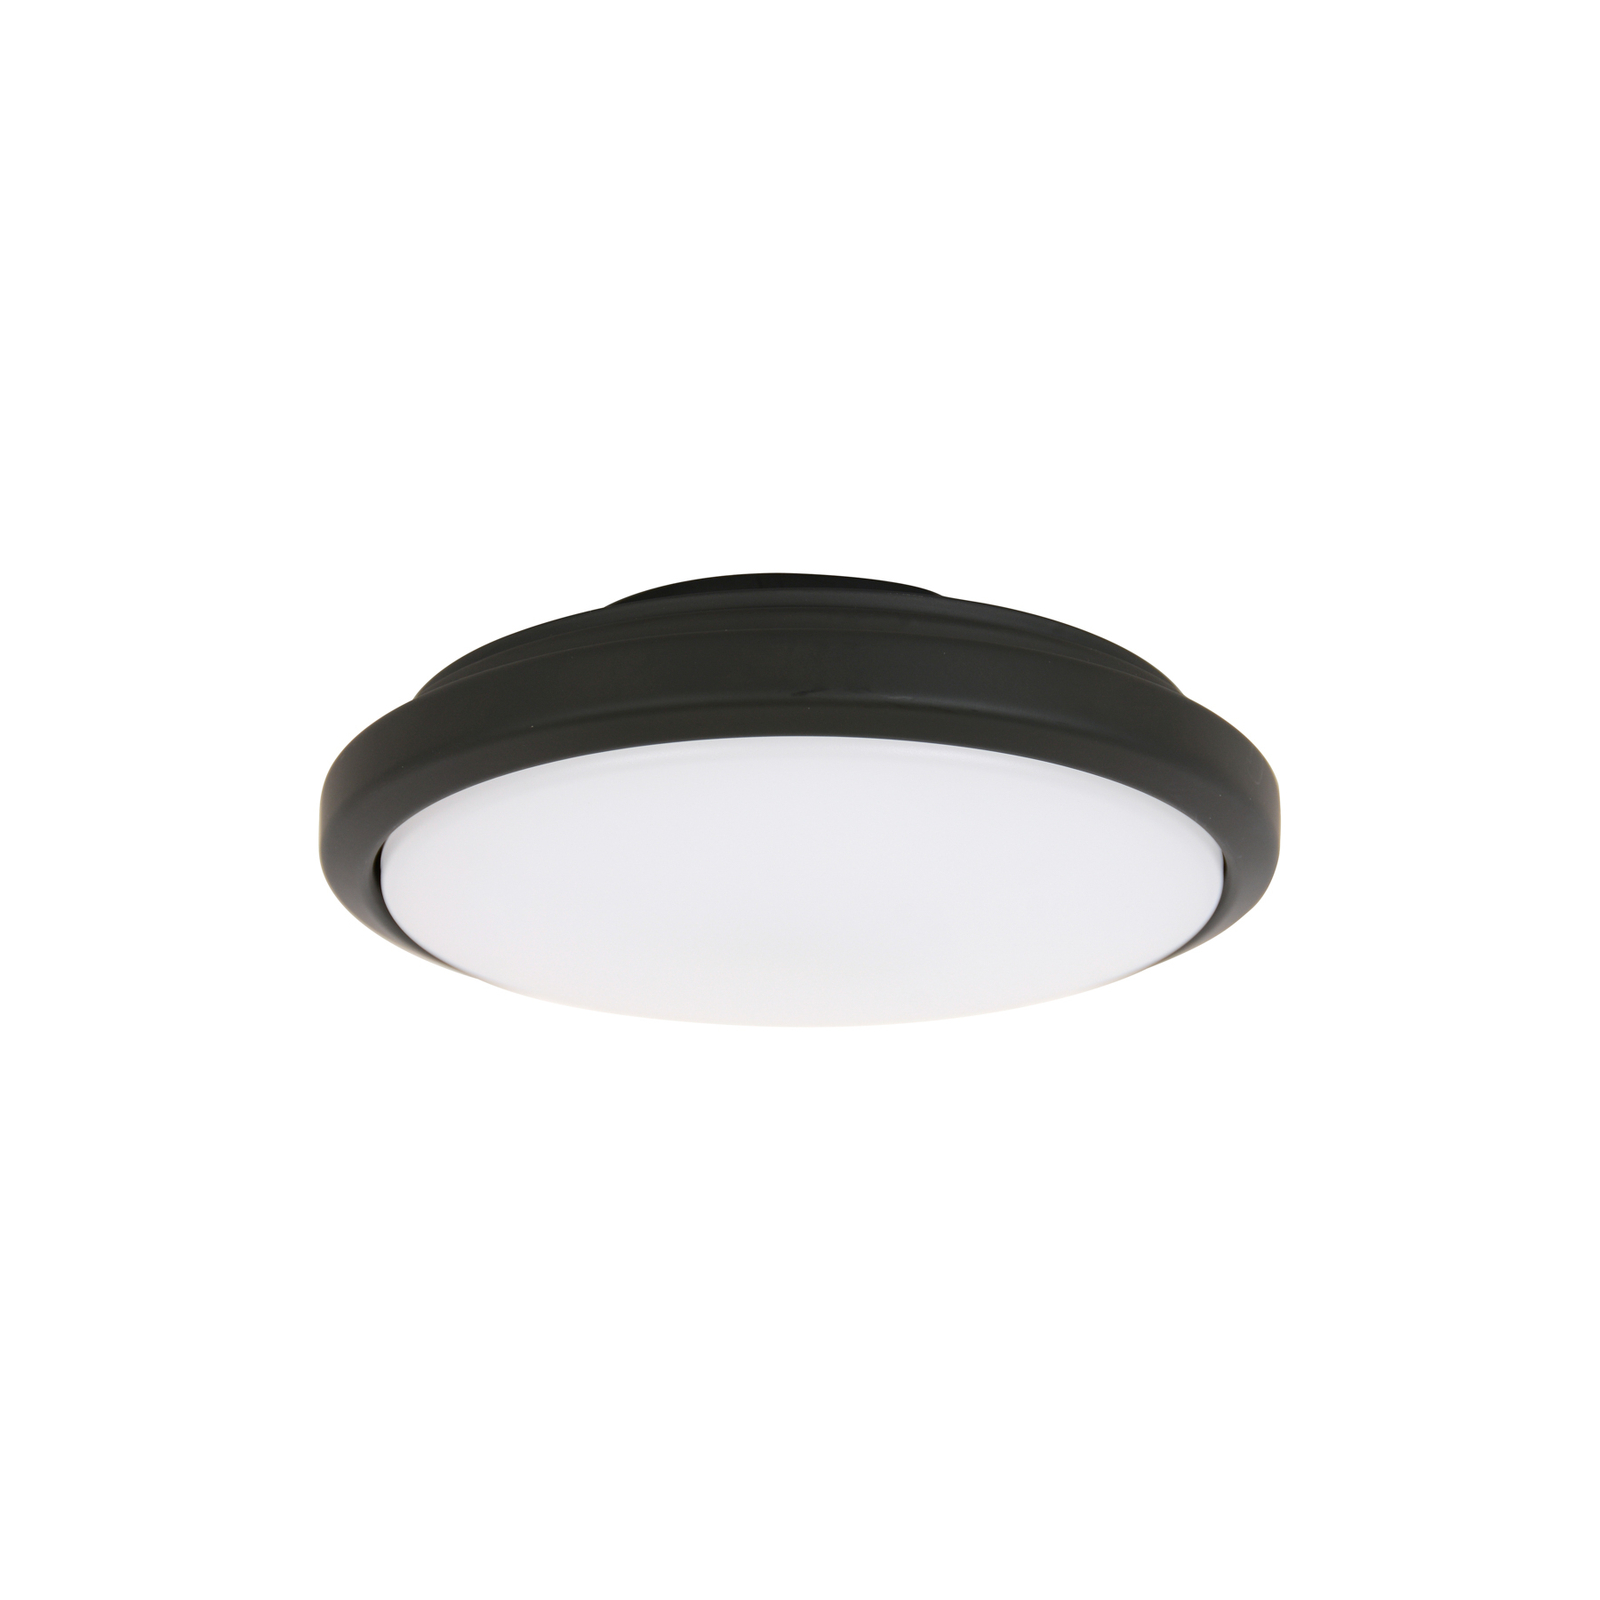 Climate III light for fans, GX53 black